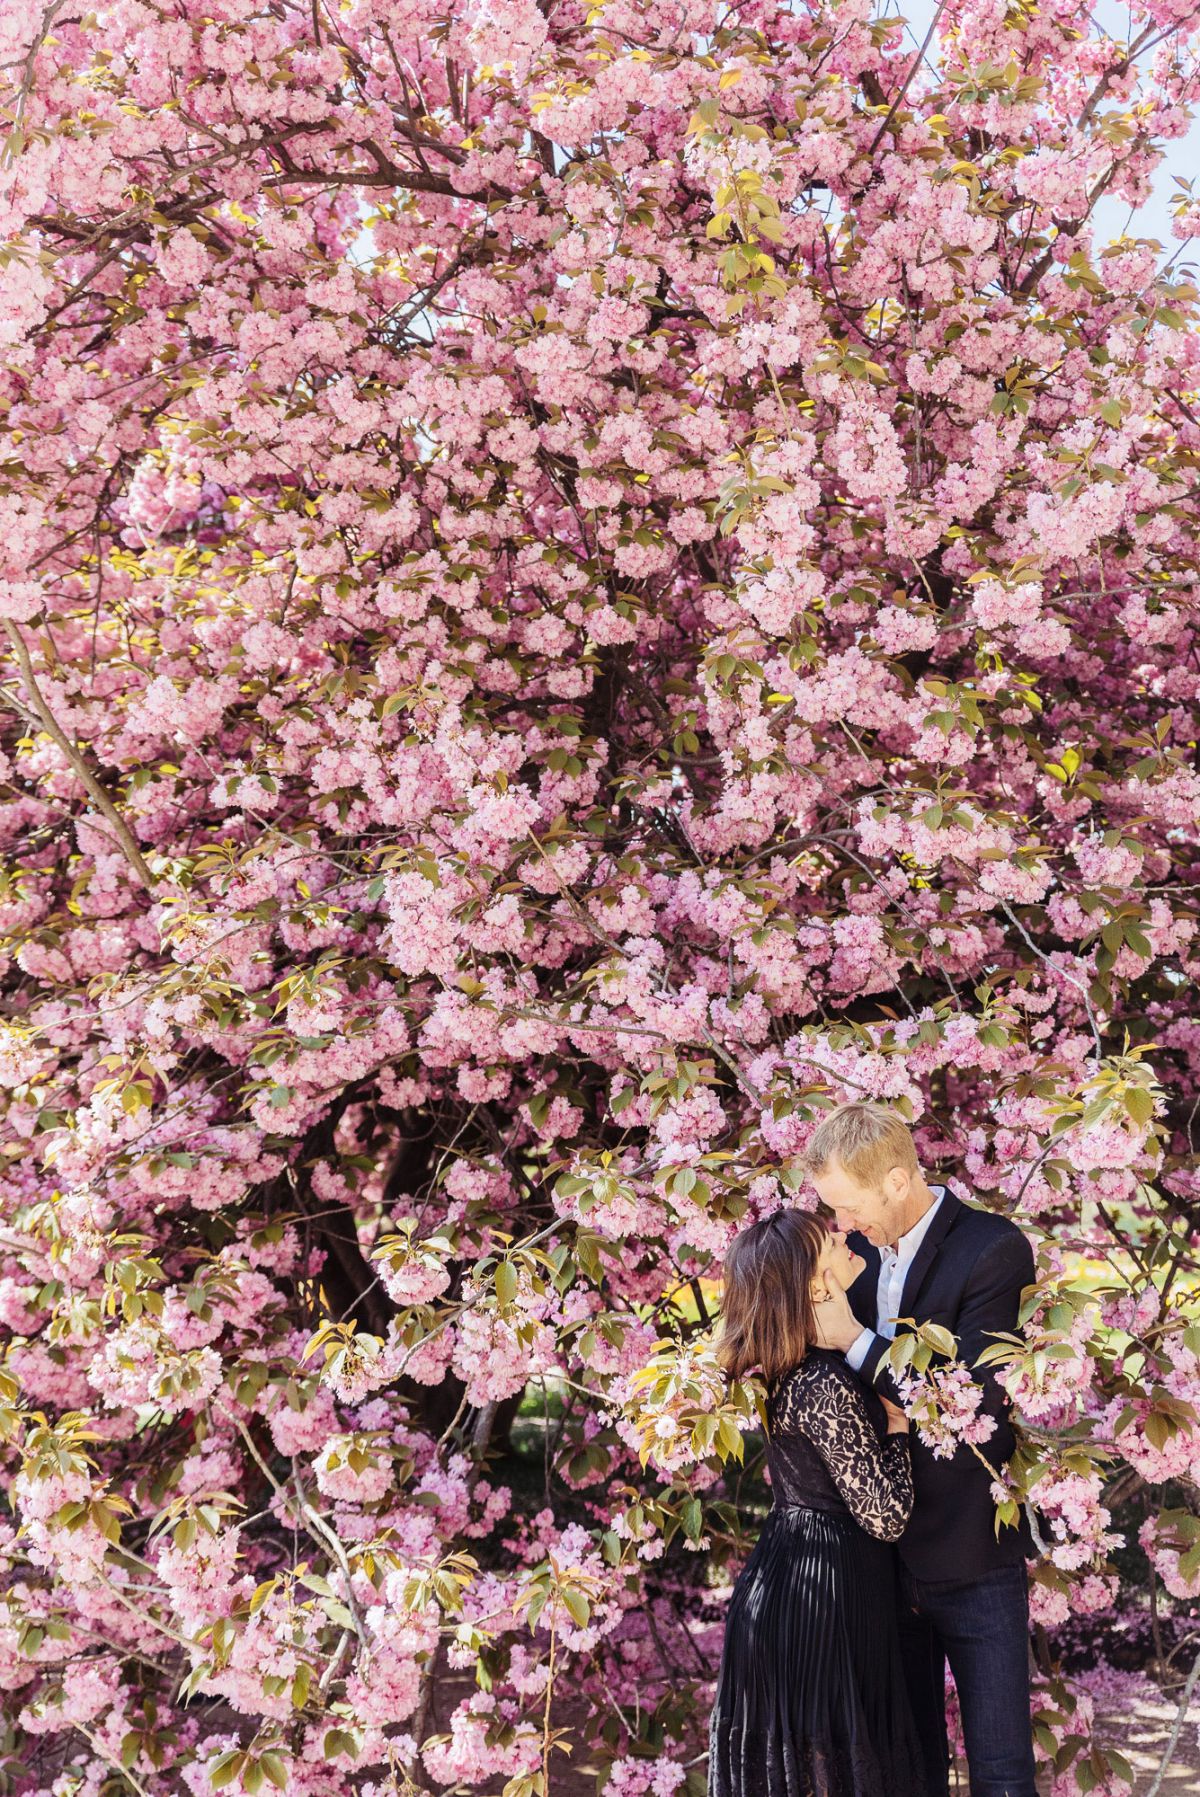 Paris Photographers surrounded by cherry blossoms